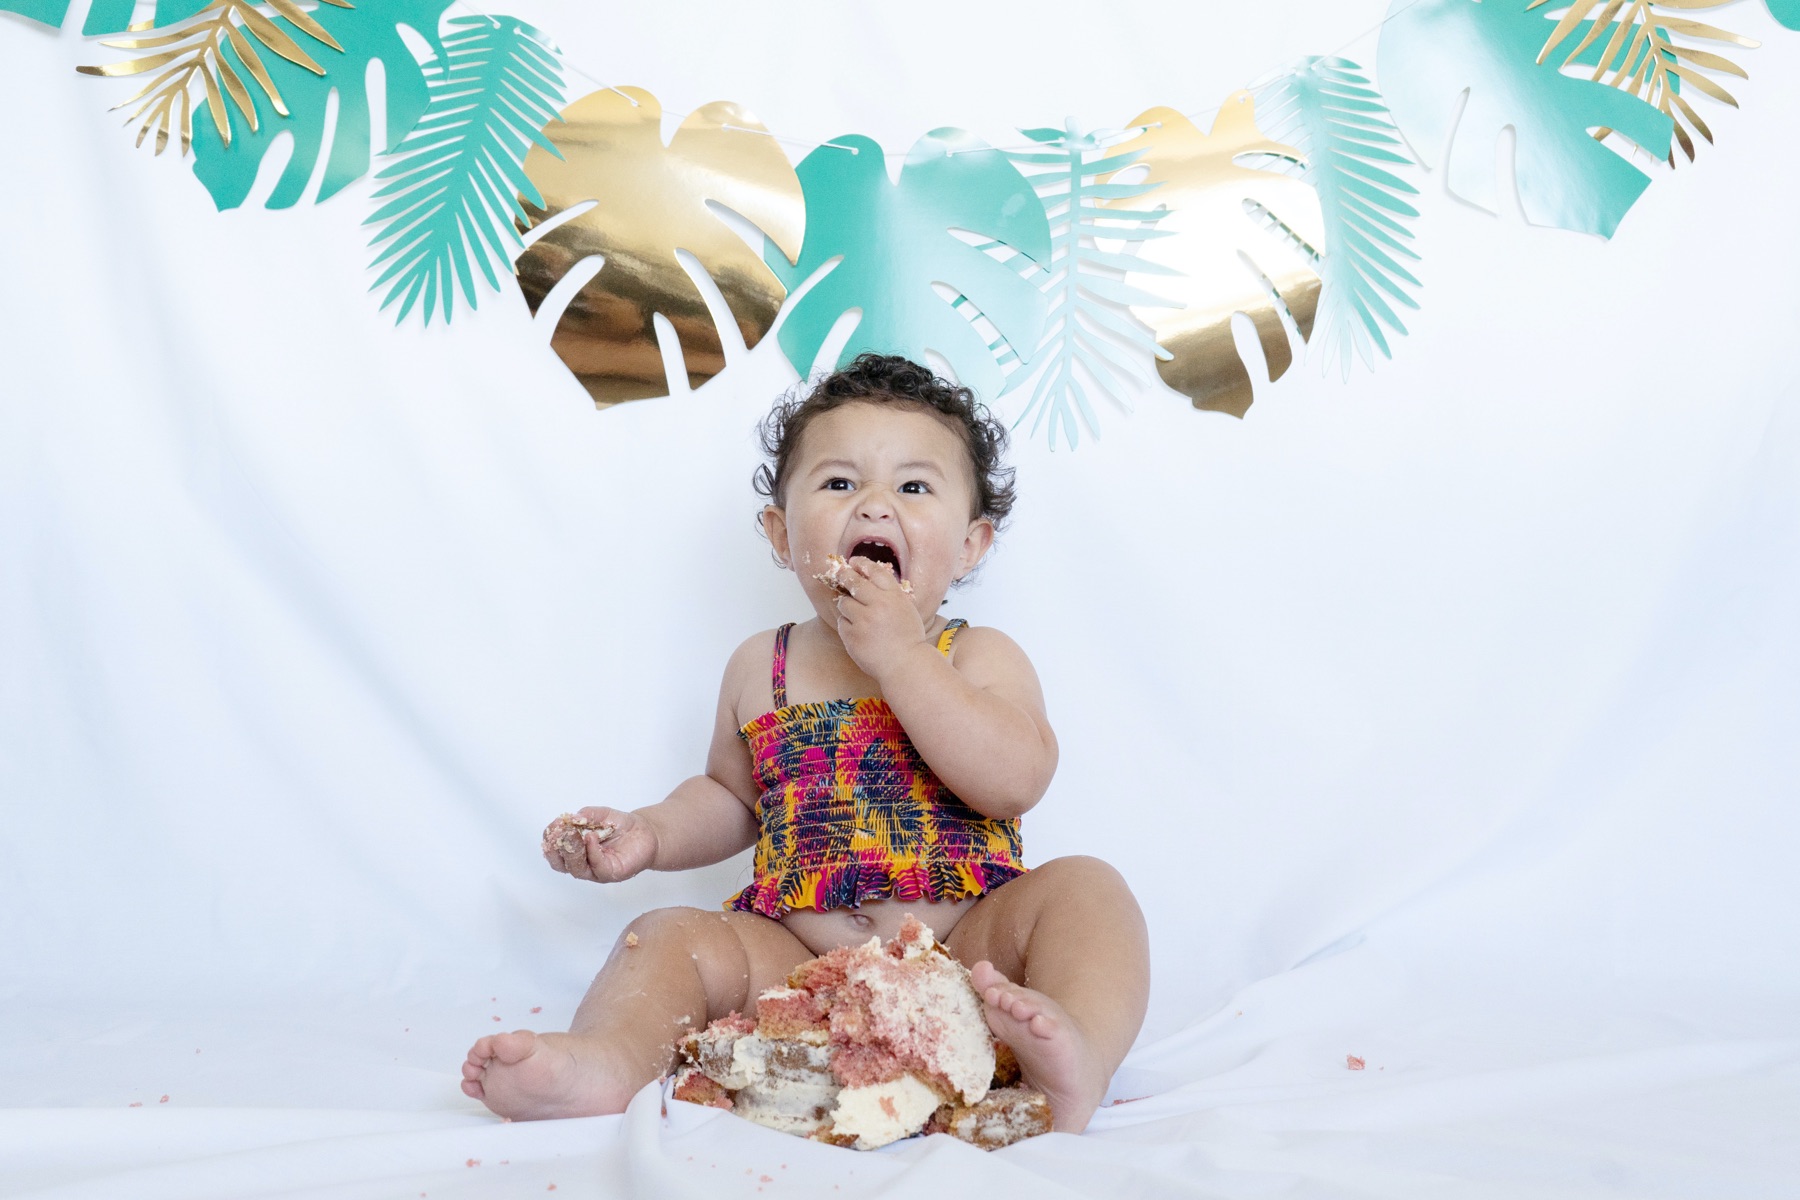 Photo of a baby eating a cupcake in front of a banner of monstera fronds.